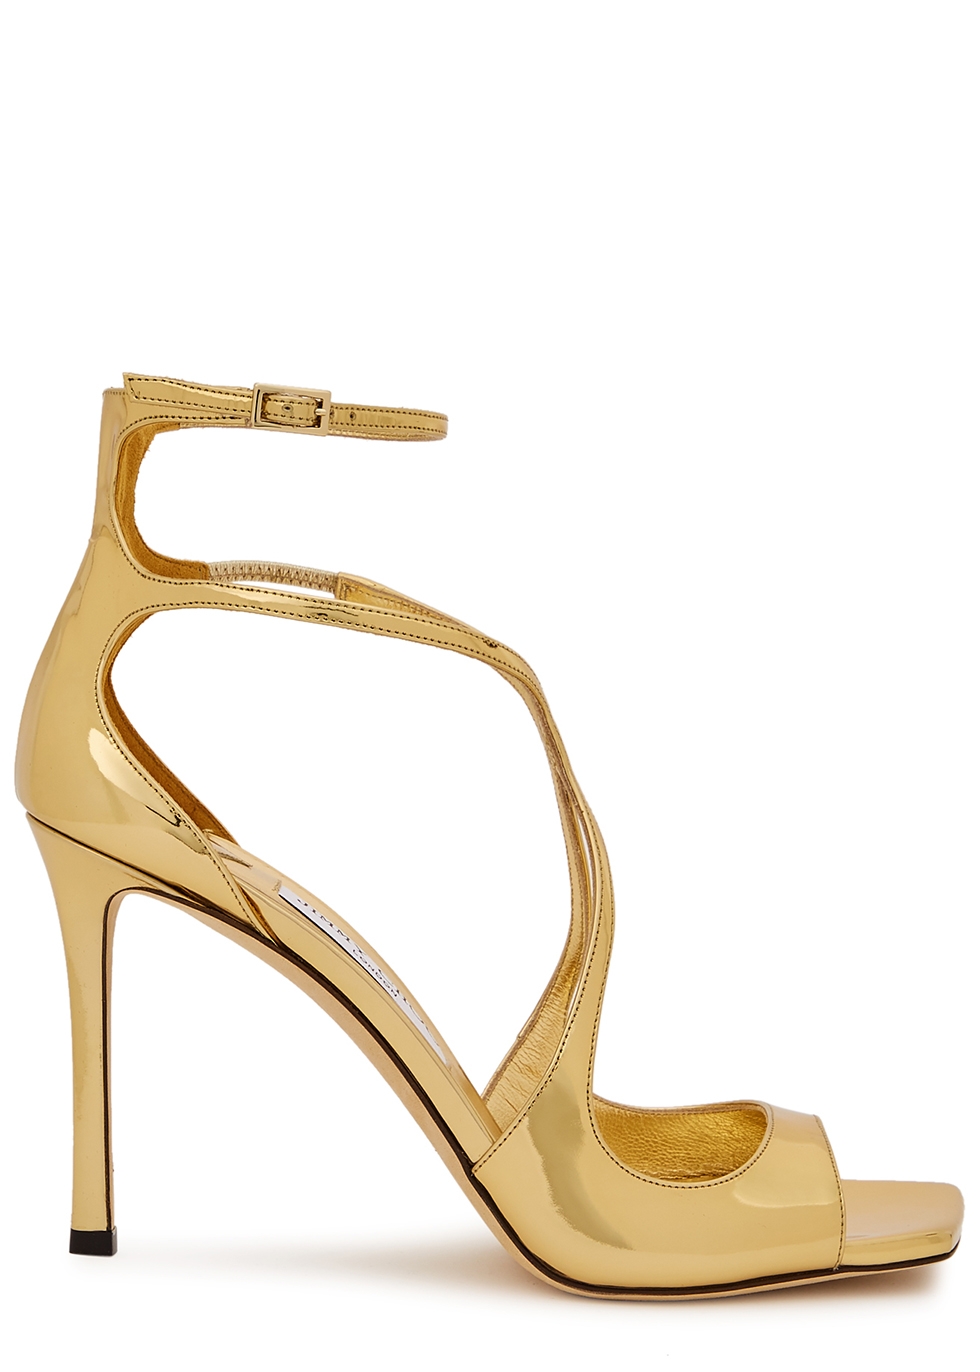 Azia 95 gold patent leather sandals